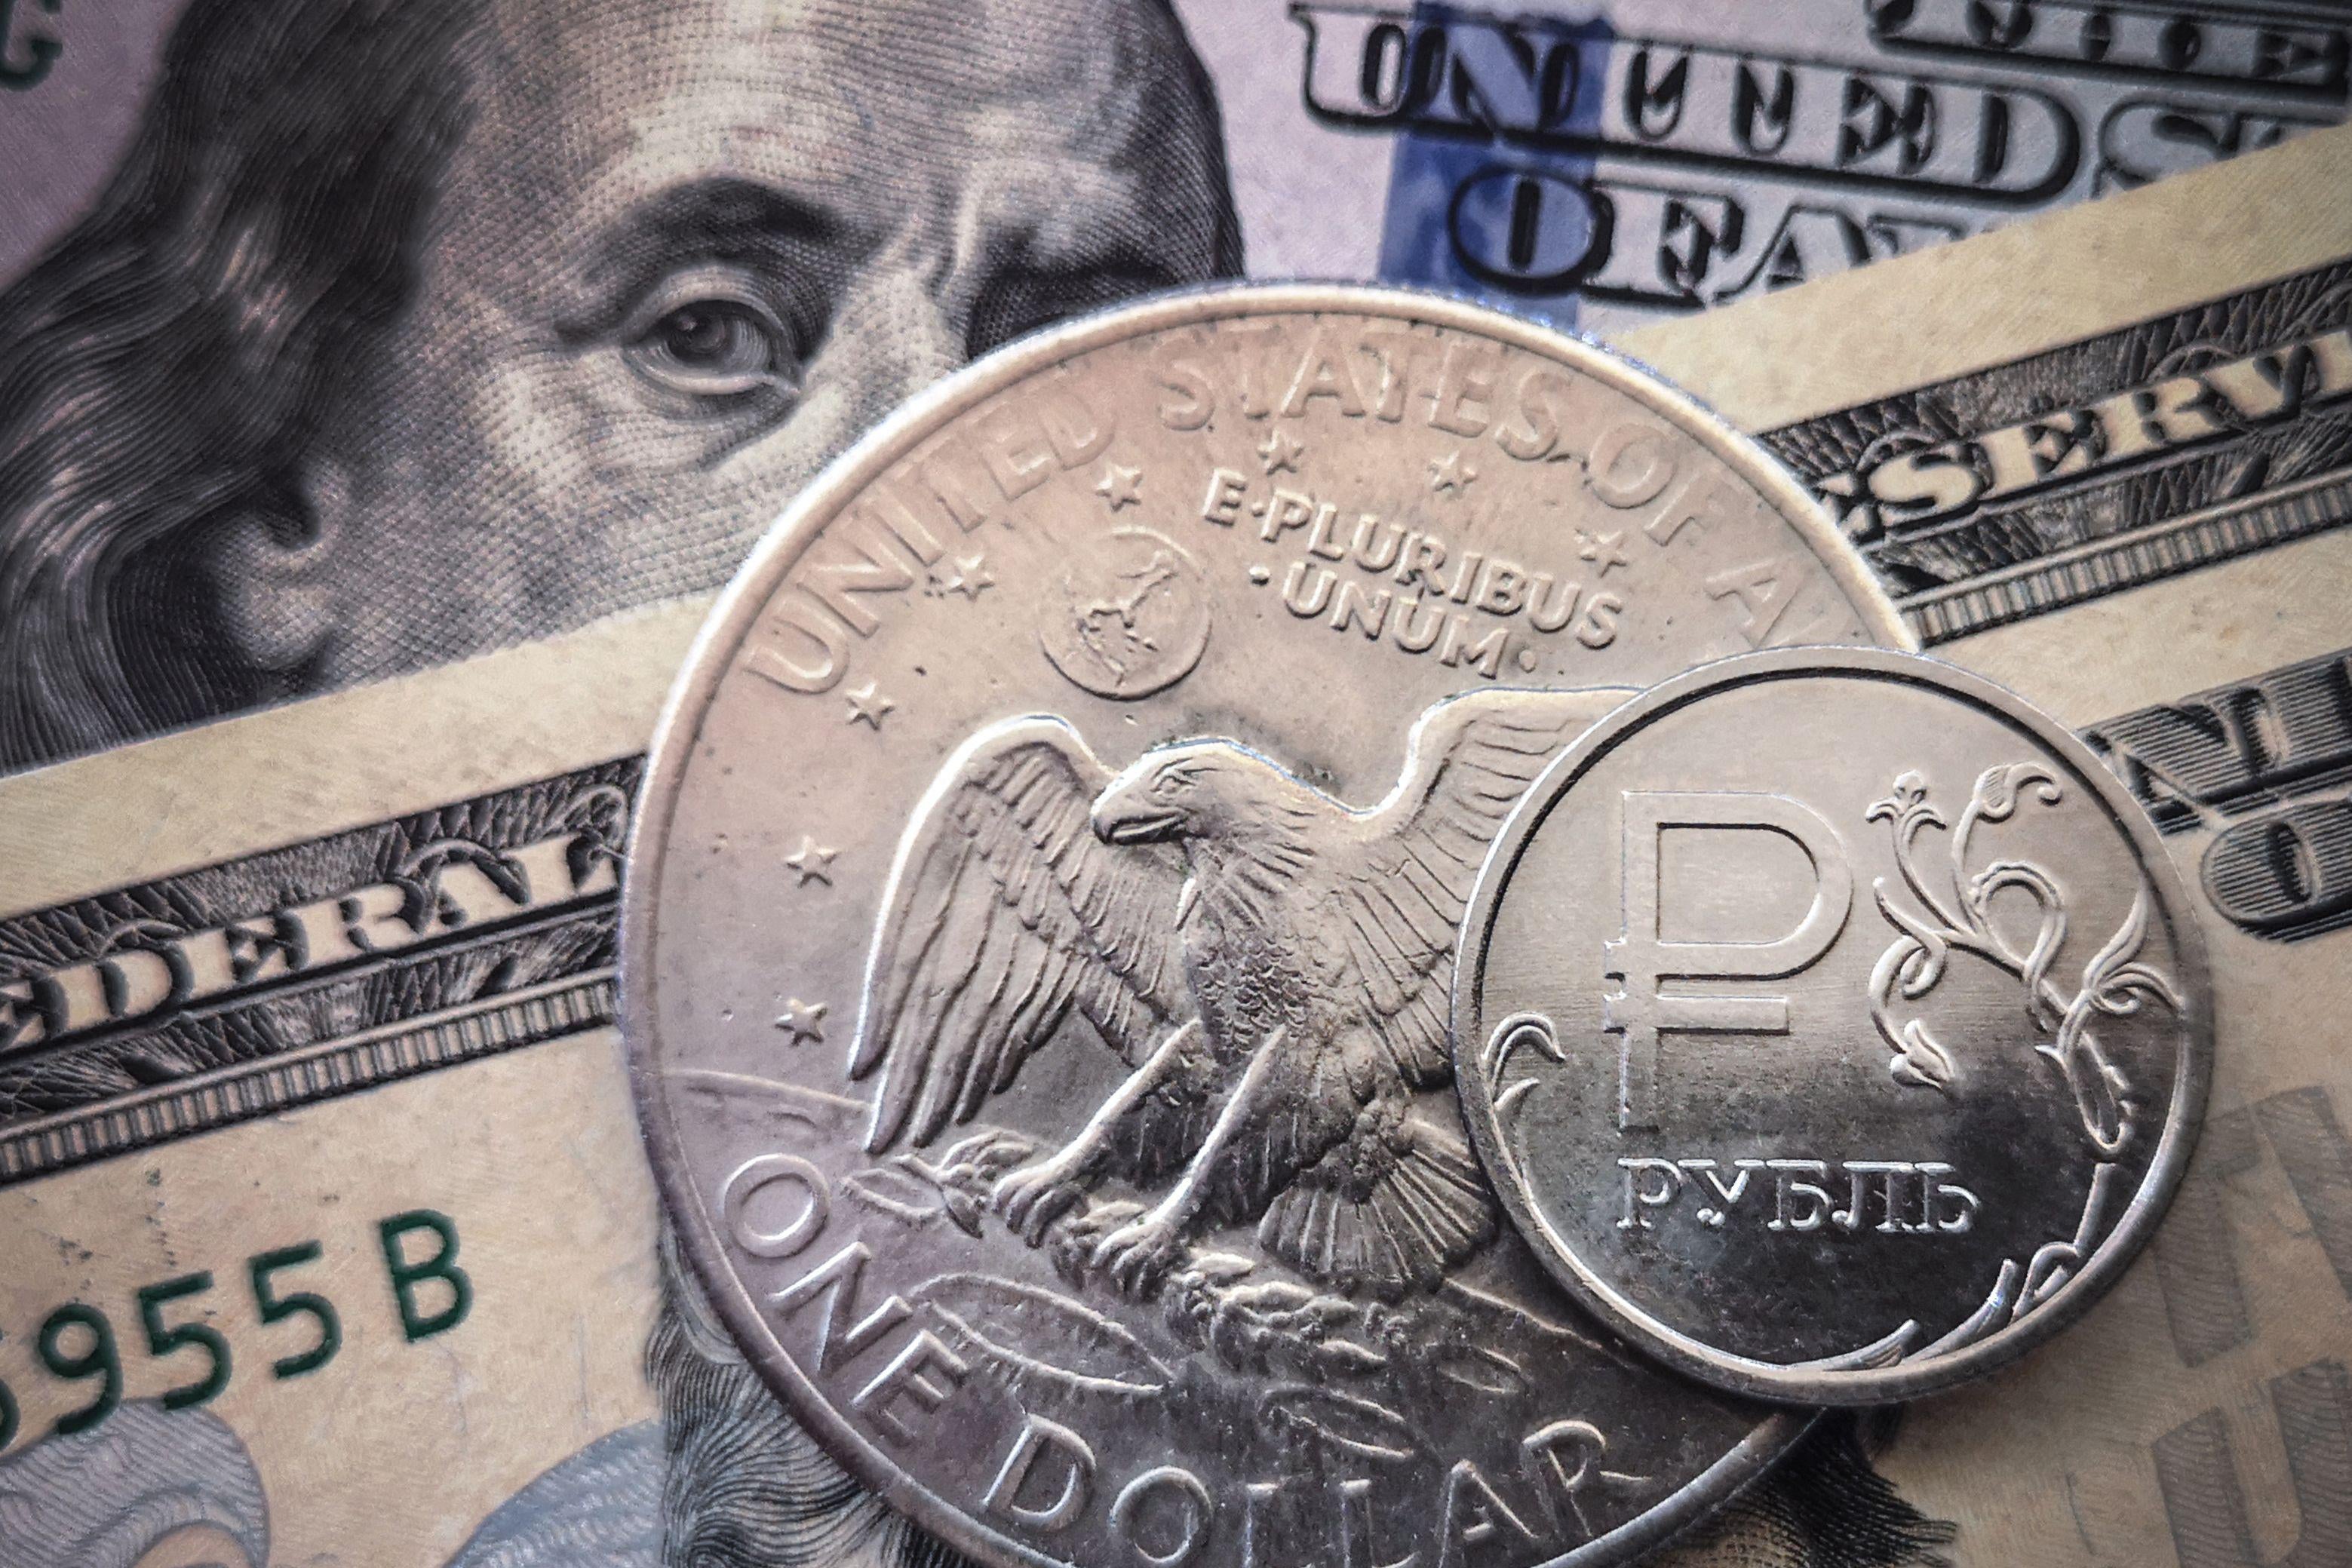 A Russian ruble coin with U.S. dollar bills and a $1 coin in Moscow.